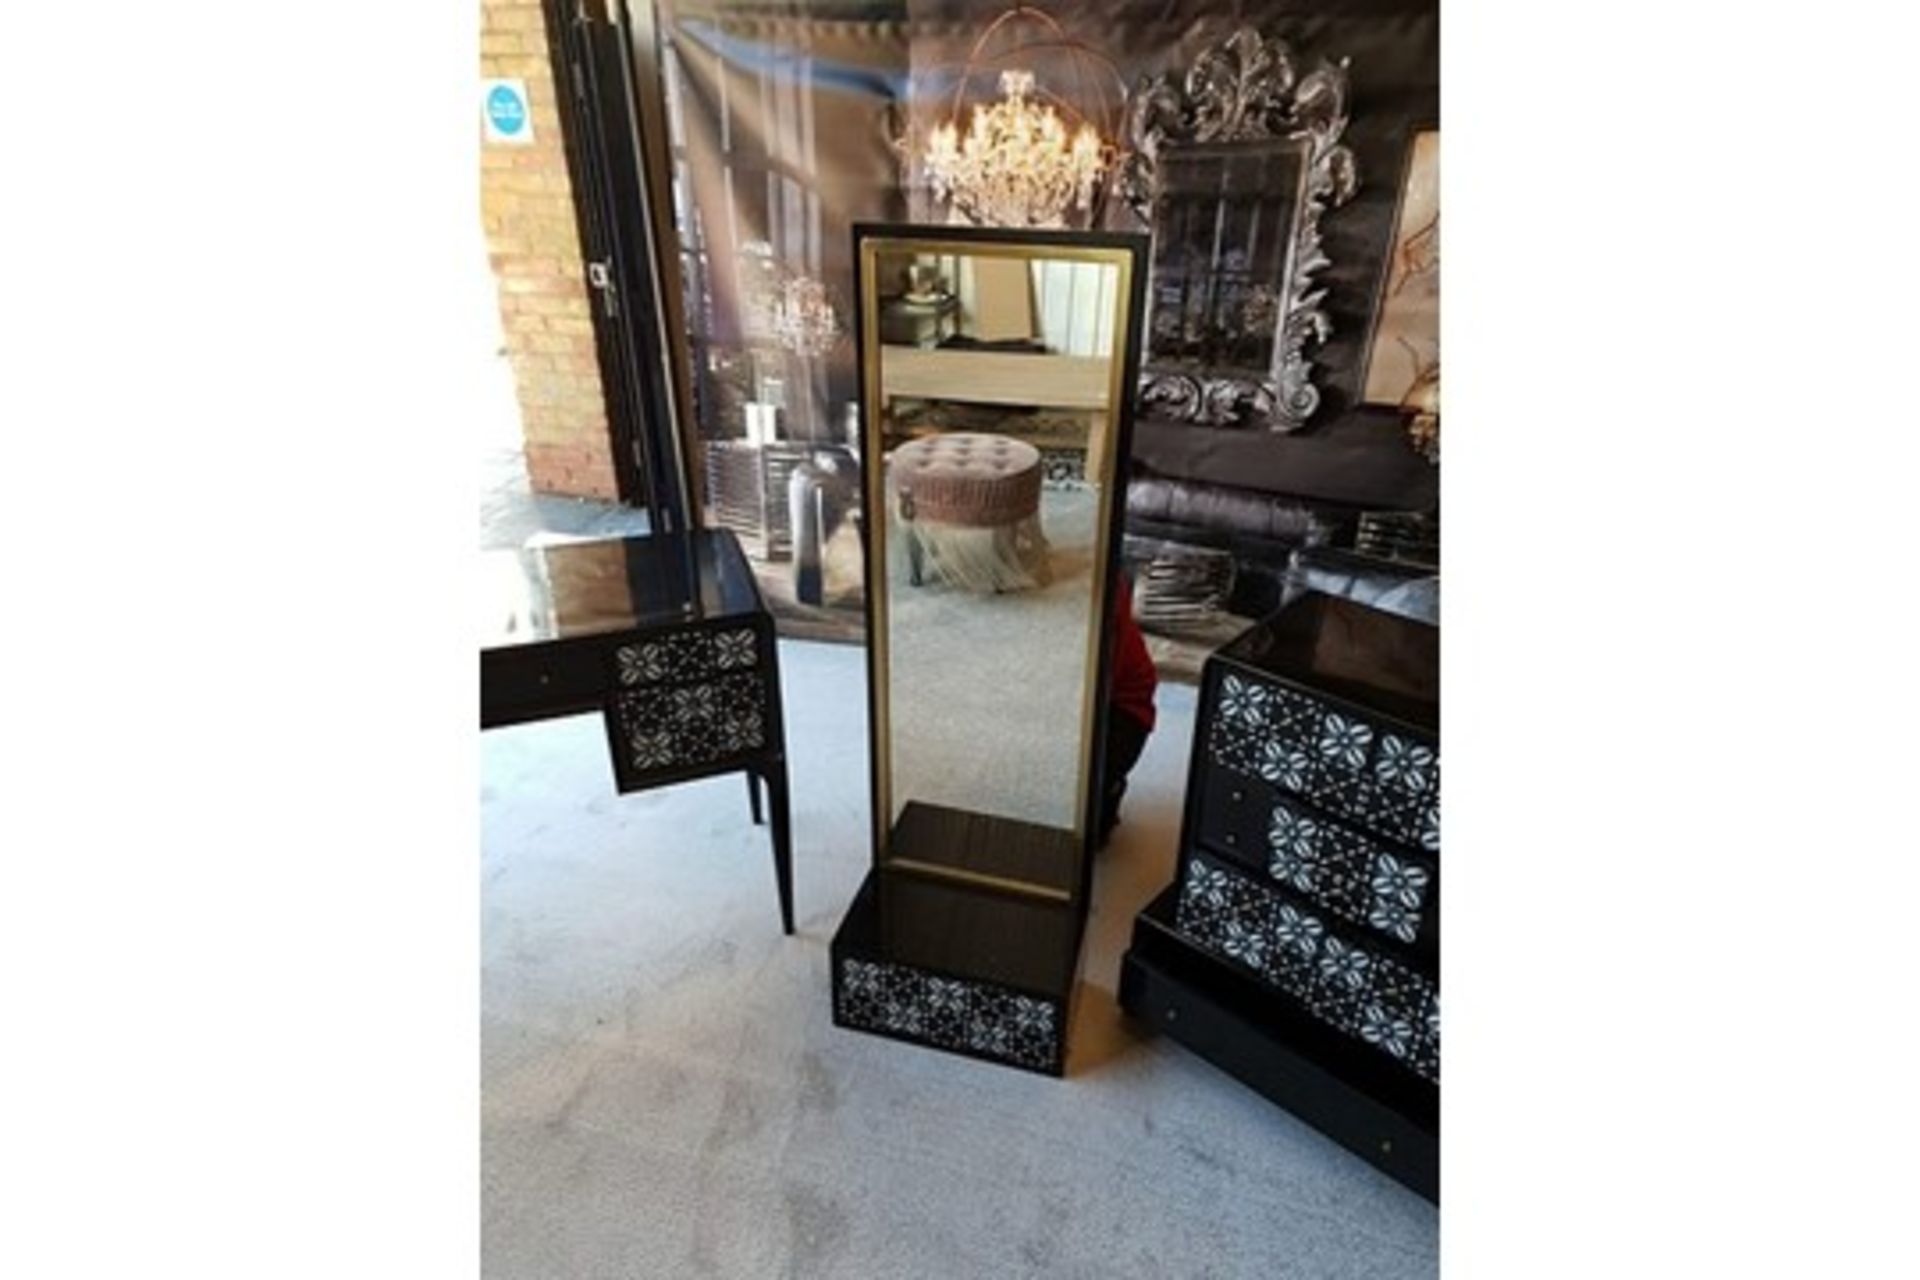 Mirror - Floating Shellshock Mirror Nightstand Lacquer Black Clean-lined and sleek, this floating